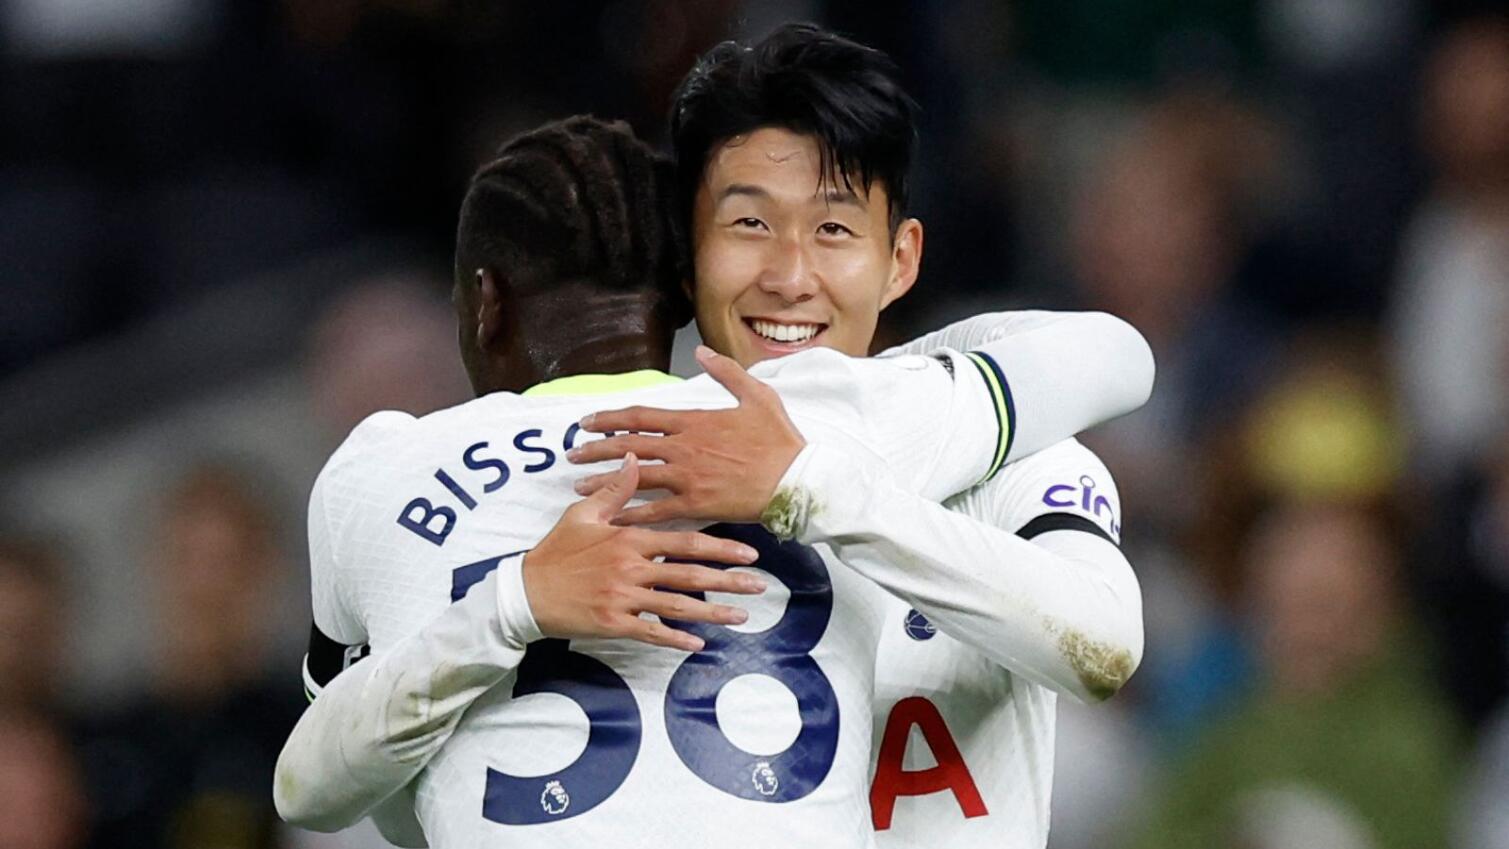 Tottenham Hotspur's Son Heung-min and Yves Bissouma celebrate after their Premier League match against Leicester City at Tottenham Hotspur Stadium on Saturday